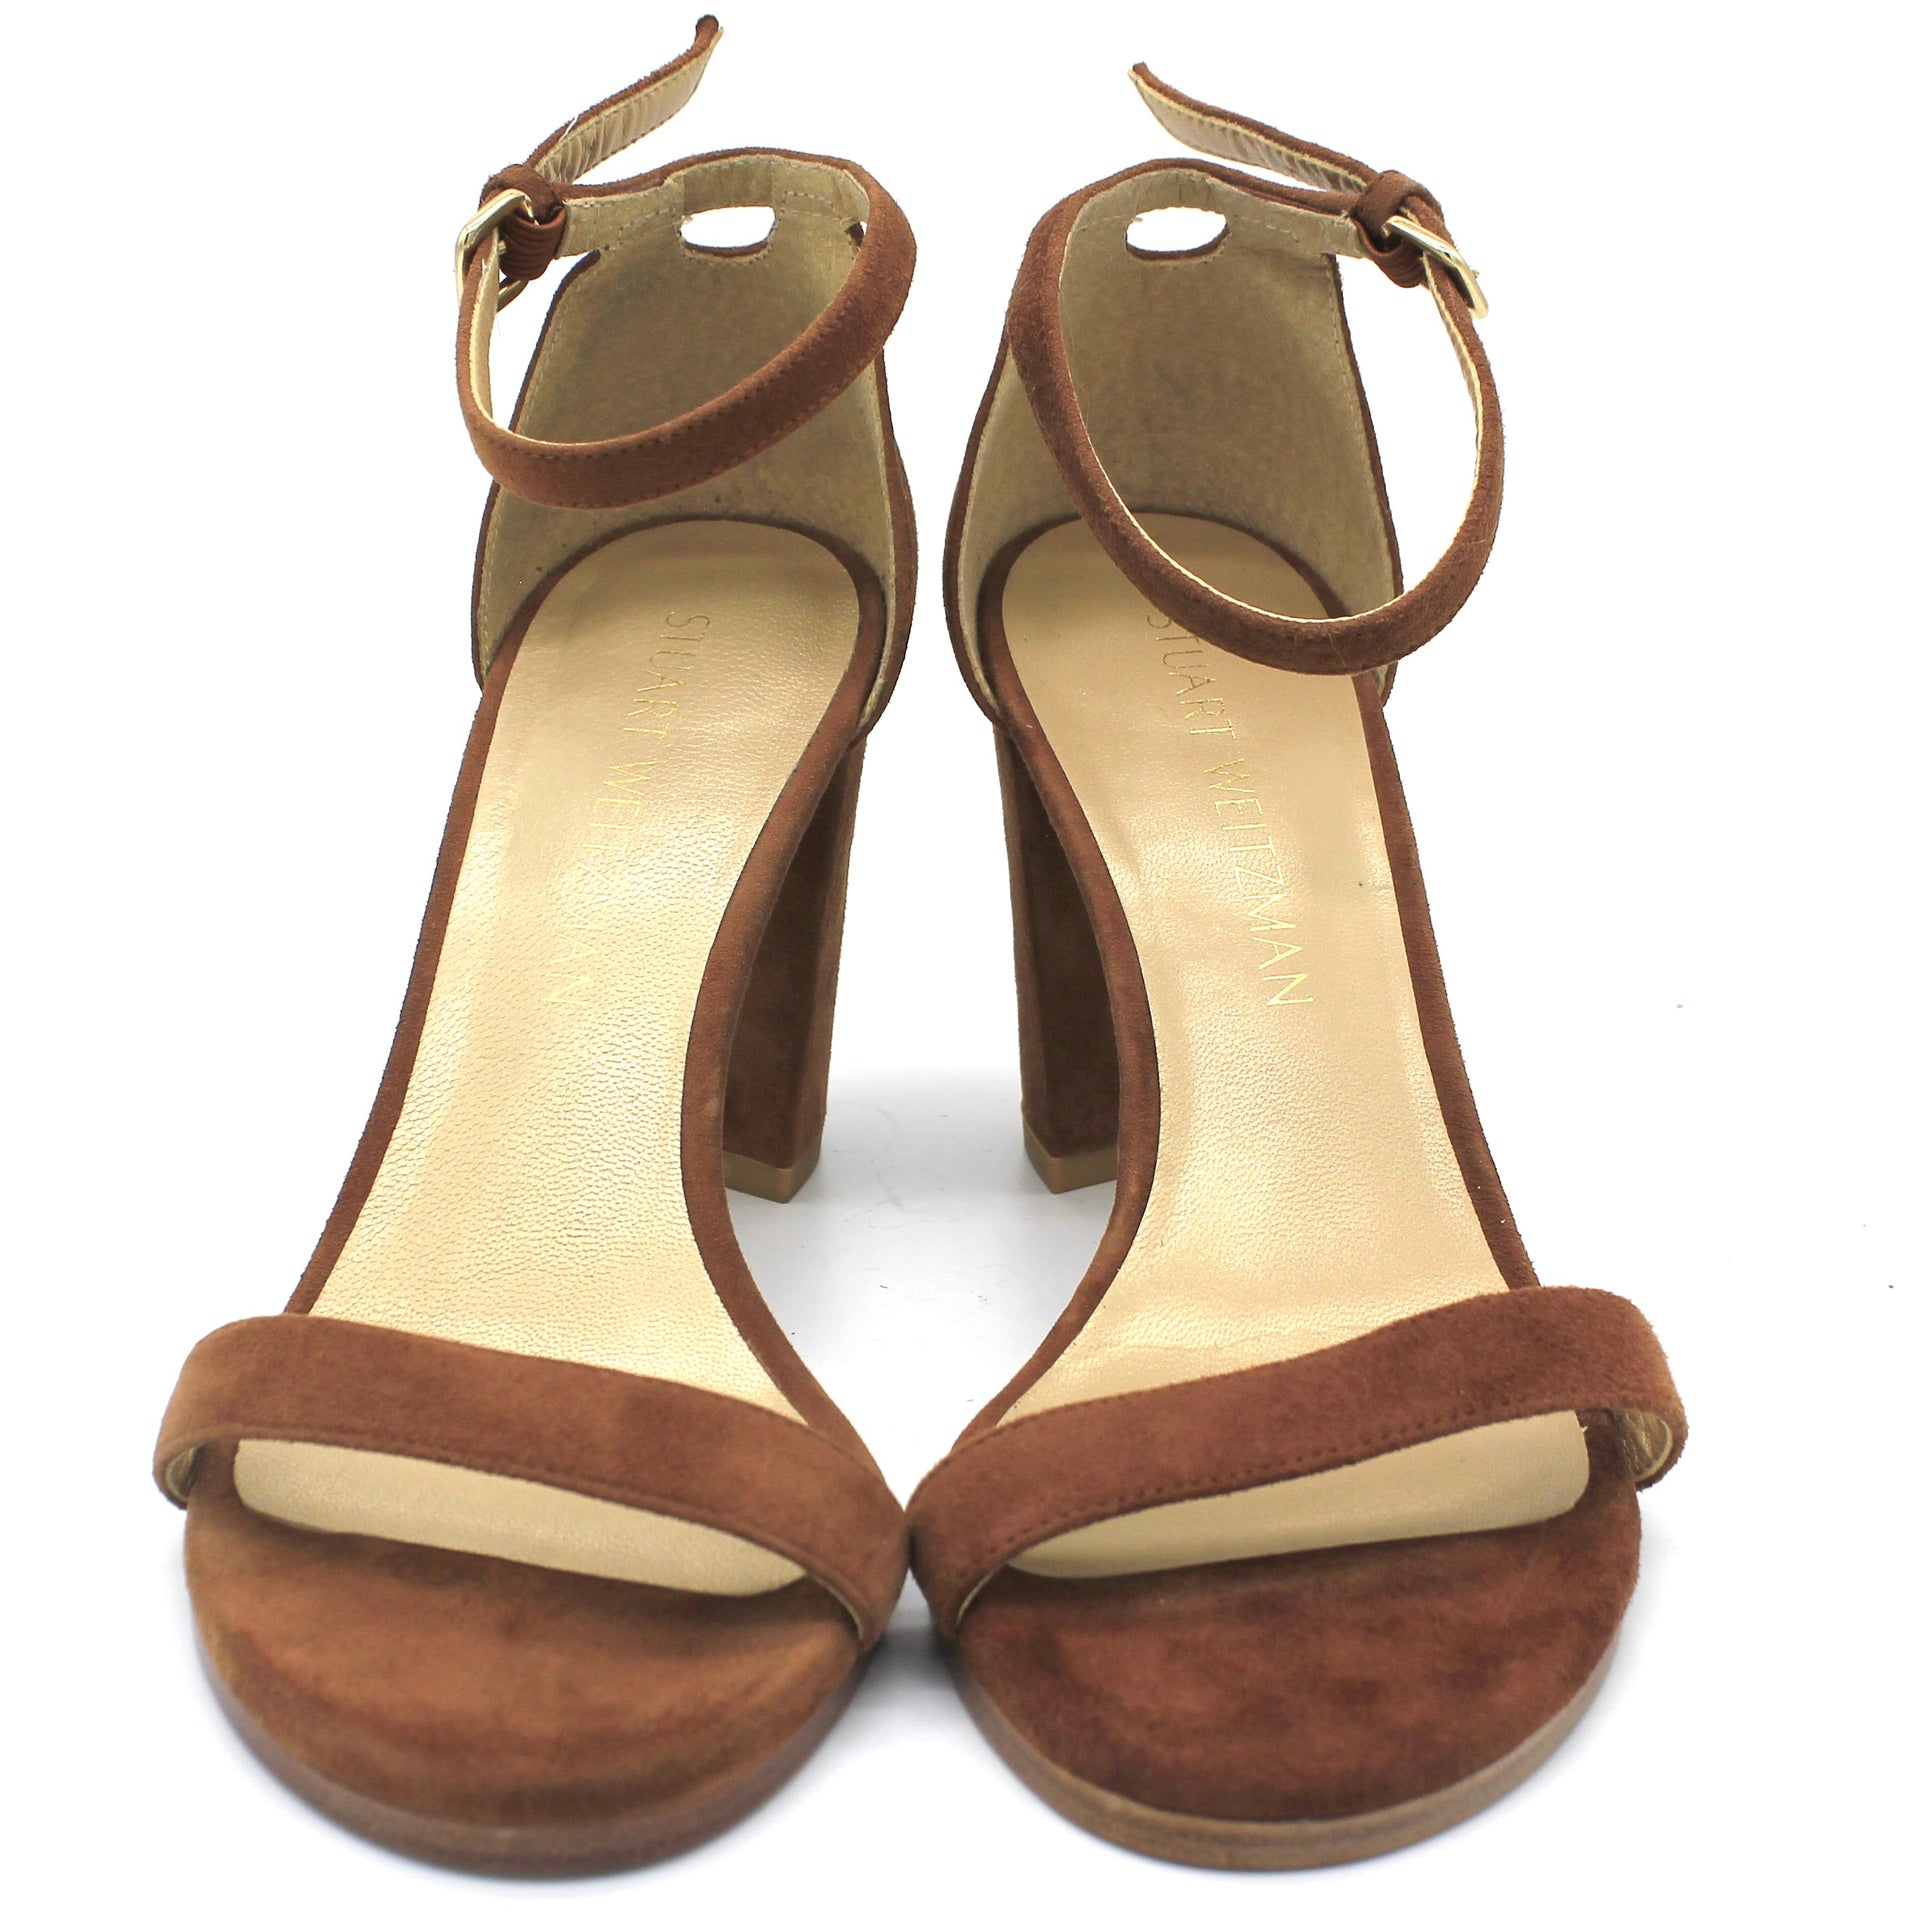 NearlyNude suede sandals